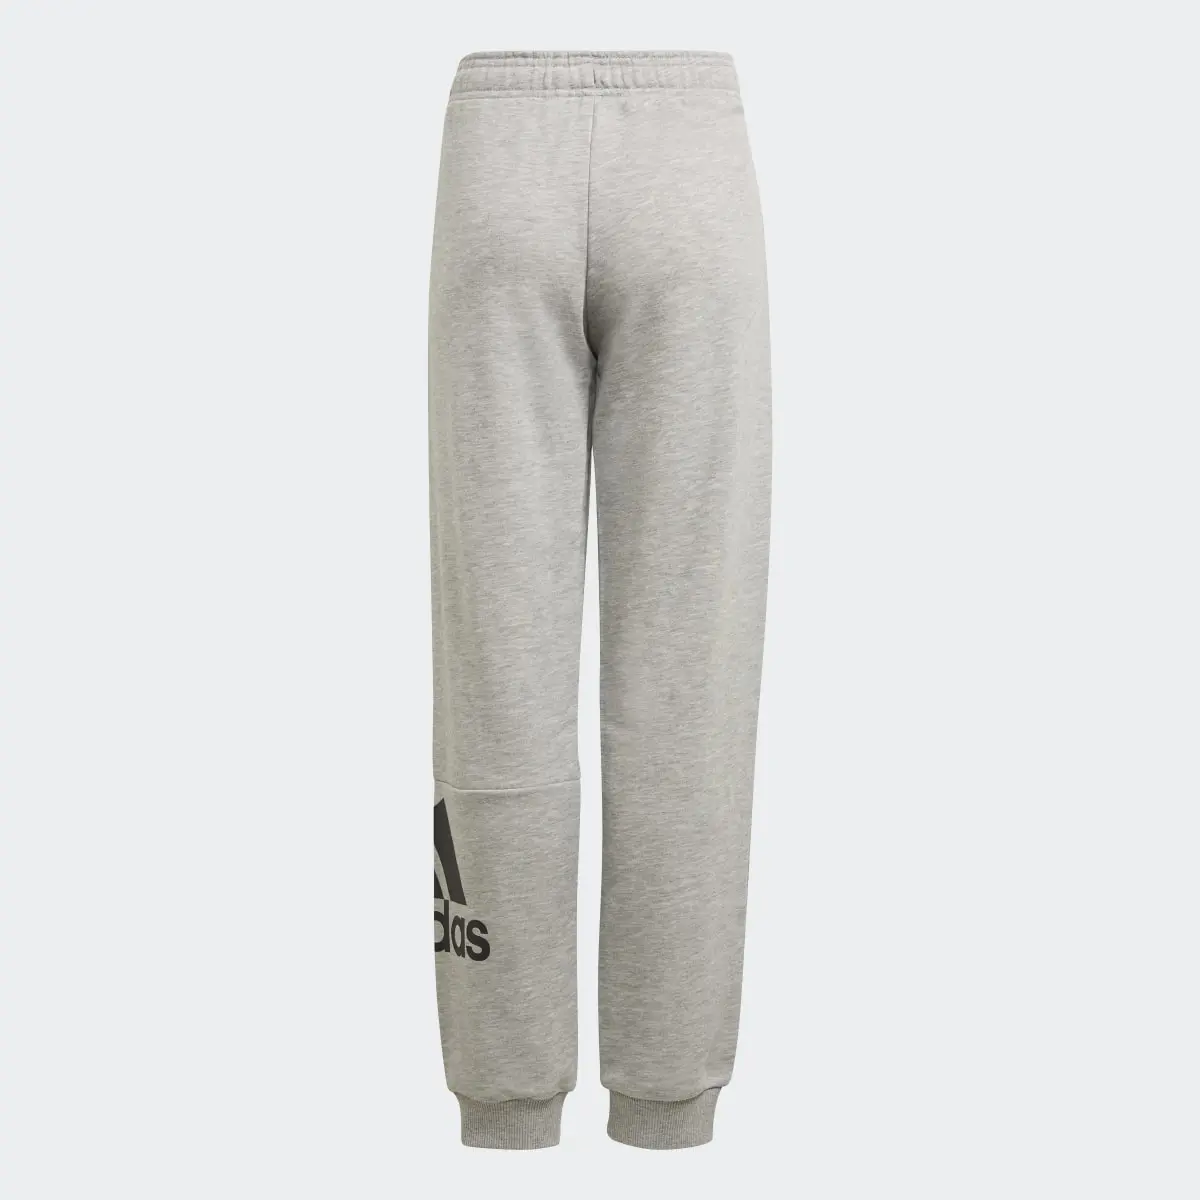 Adidas Essentials French Terry Pants. 2